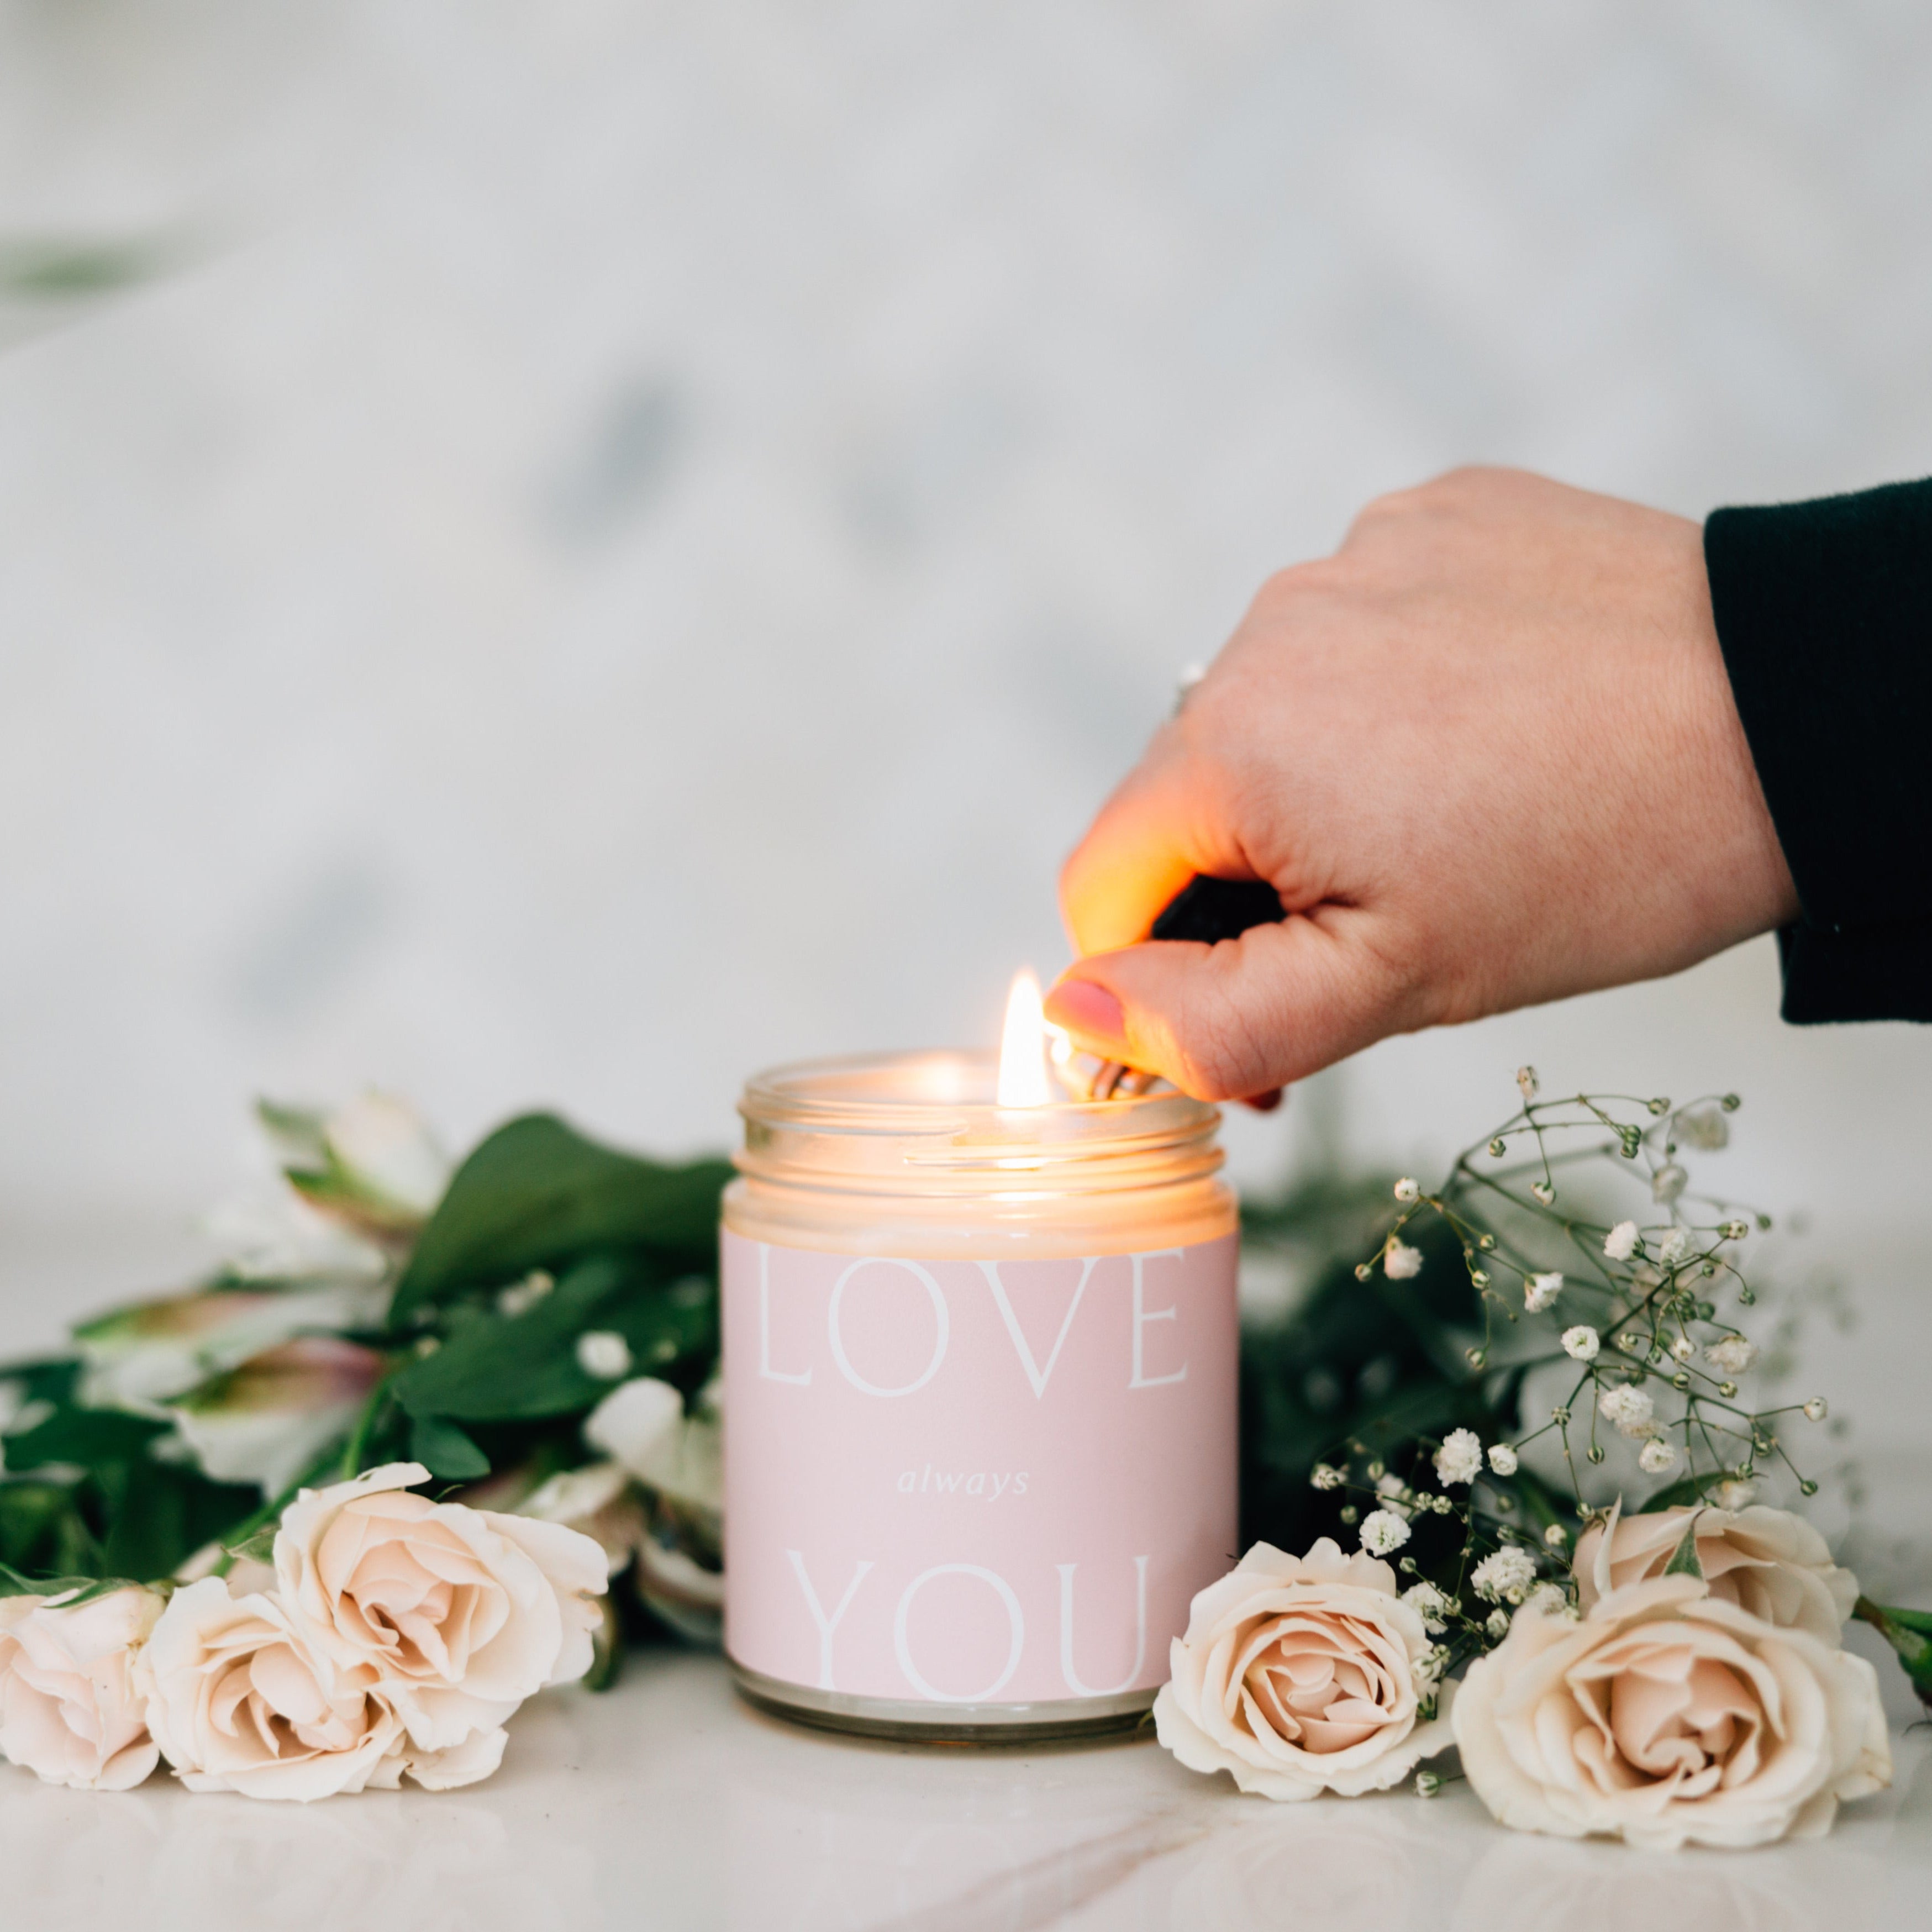 The Floral Industry's Dirty Secrets – Fontana Candle Co